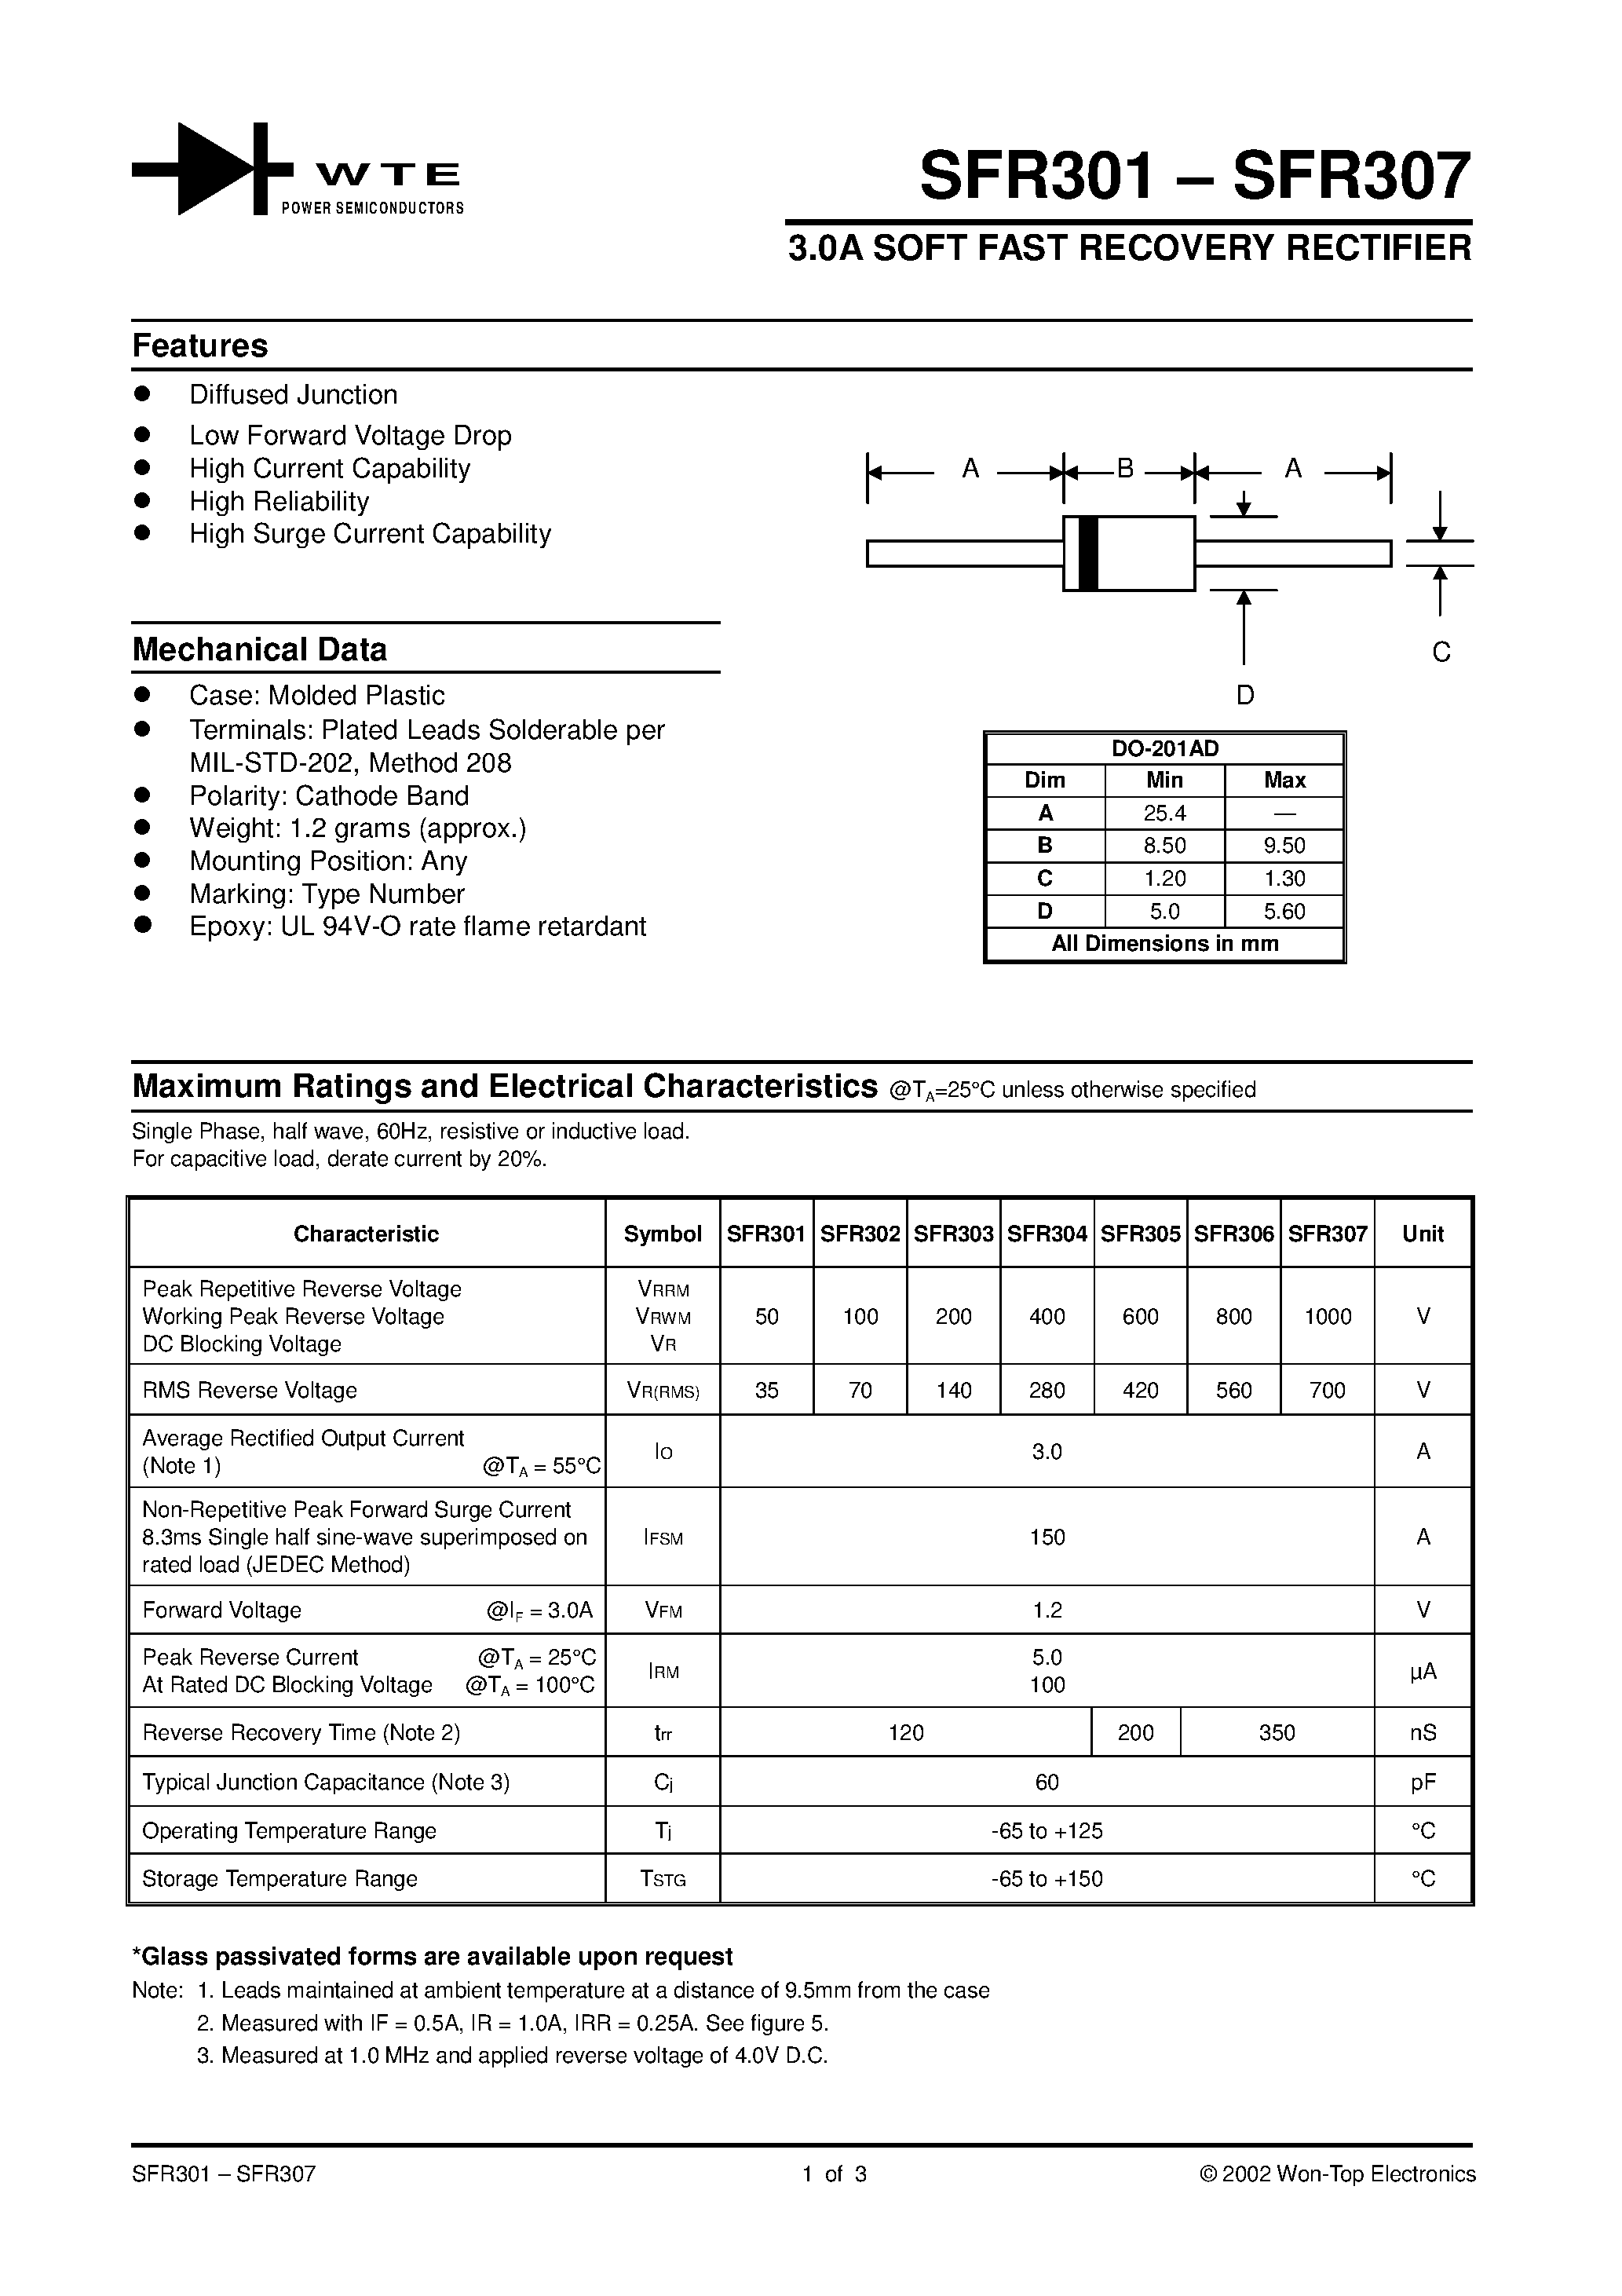 Datasheet SFR301 - 3.0A SOFT FAST RECOVERY RECTIFIER page 1